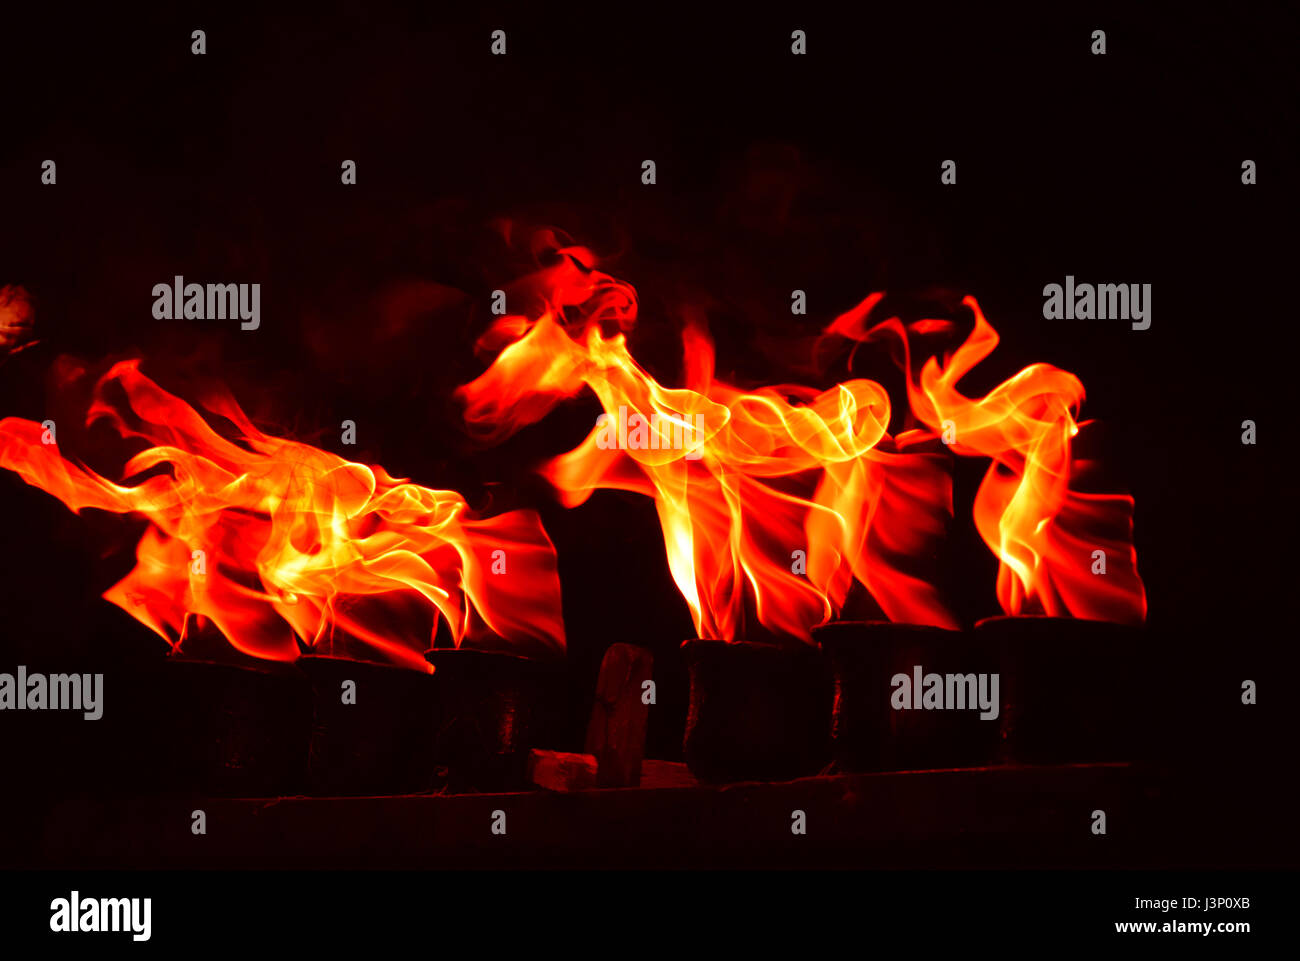 A raging fire in a post Stock Photo